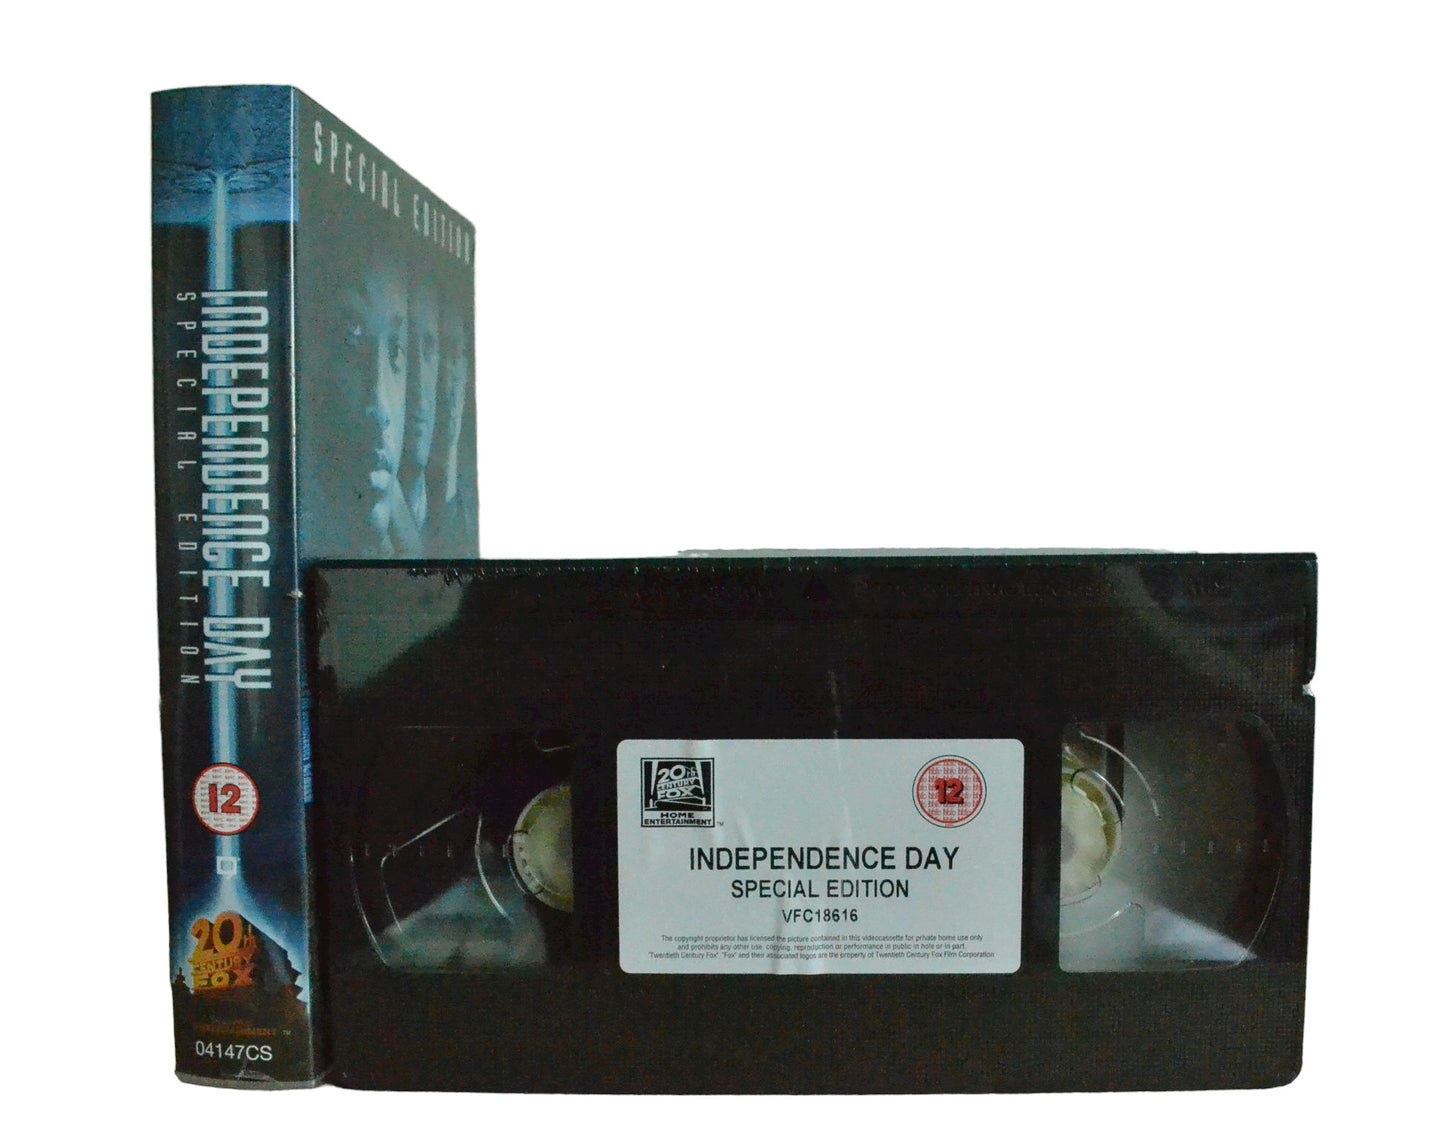 Independence Day (Special Edition) - Will Smith - 20th Century Fox Home Entertainment - Brand New Sealed - Pal VHS-